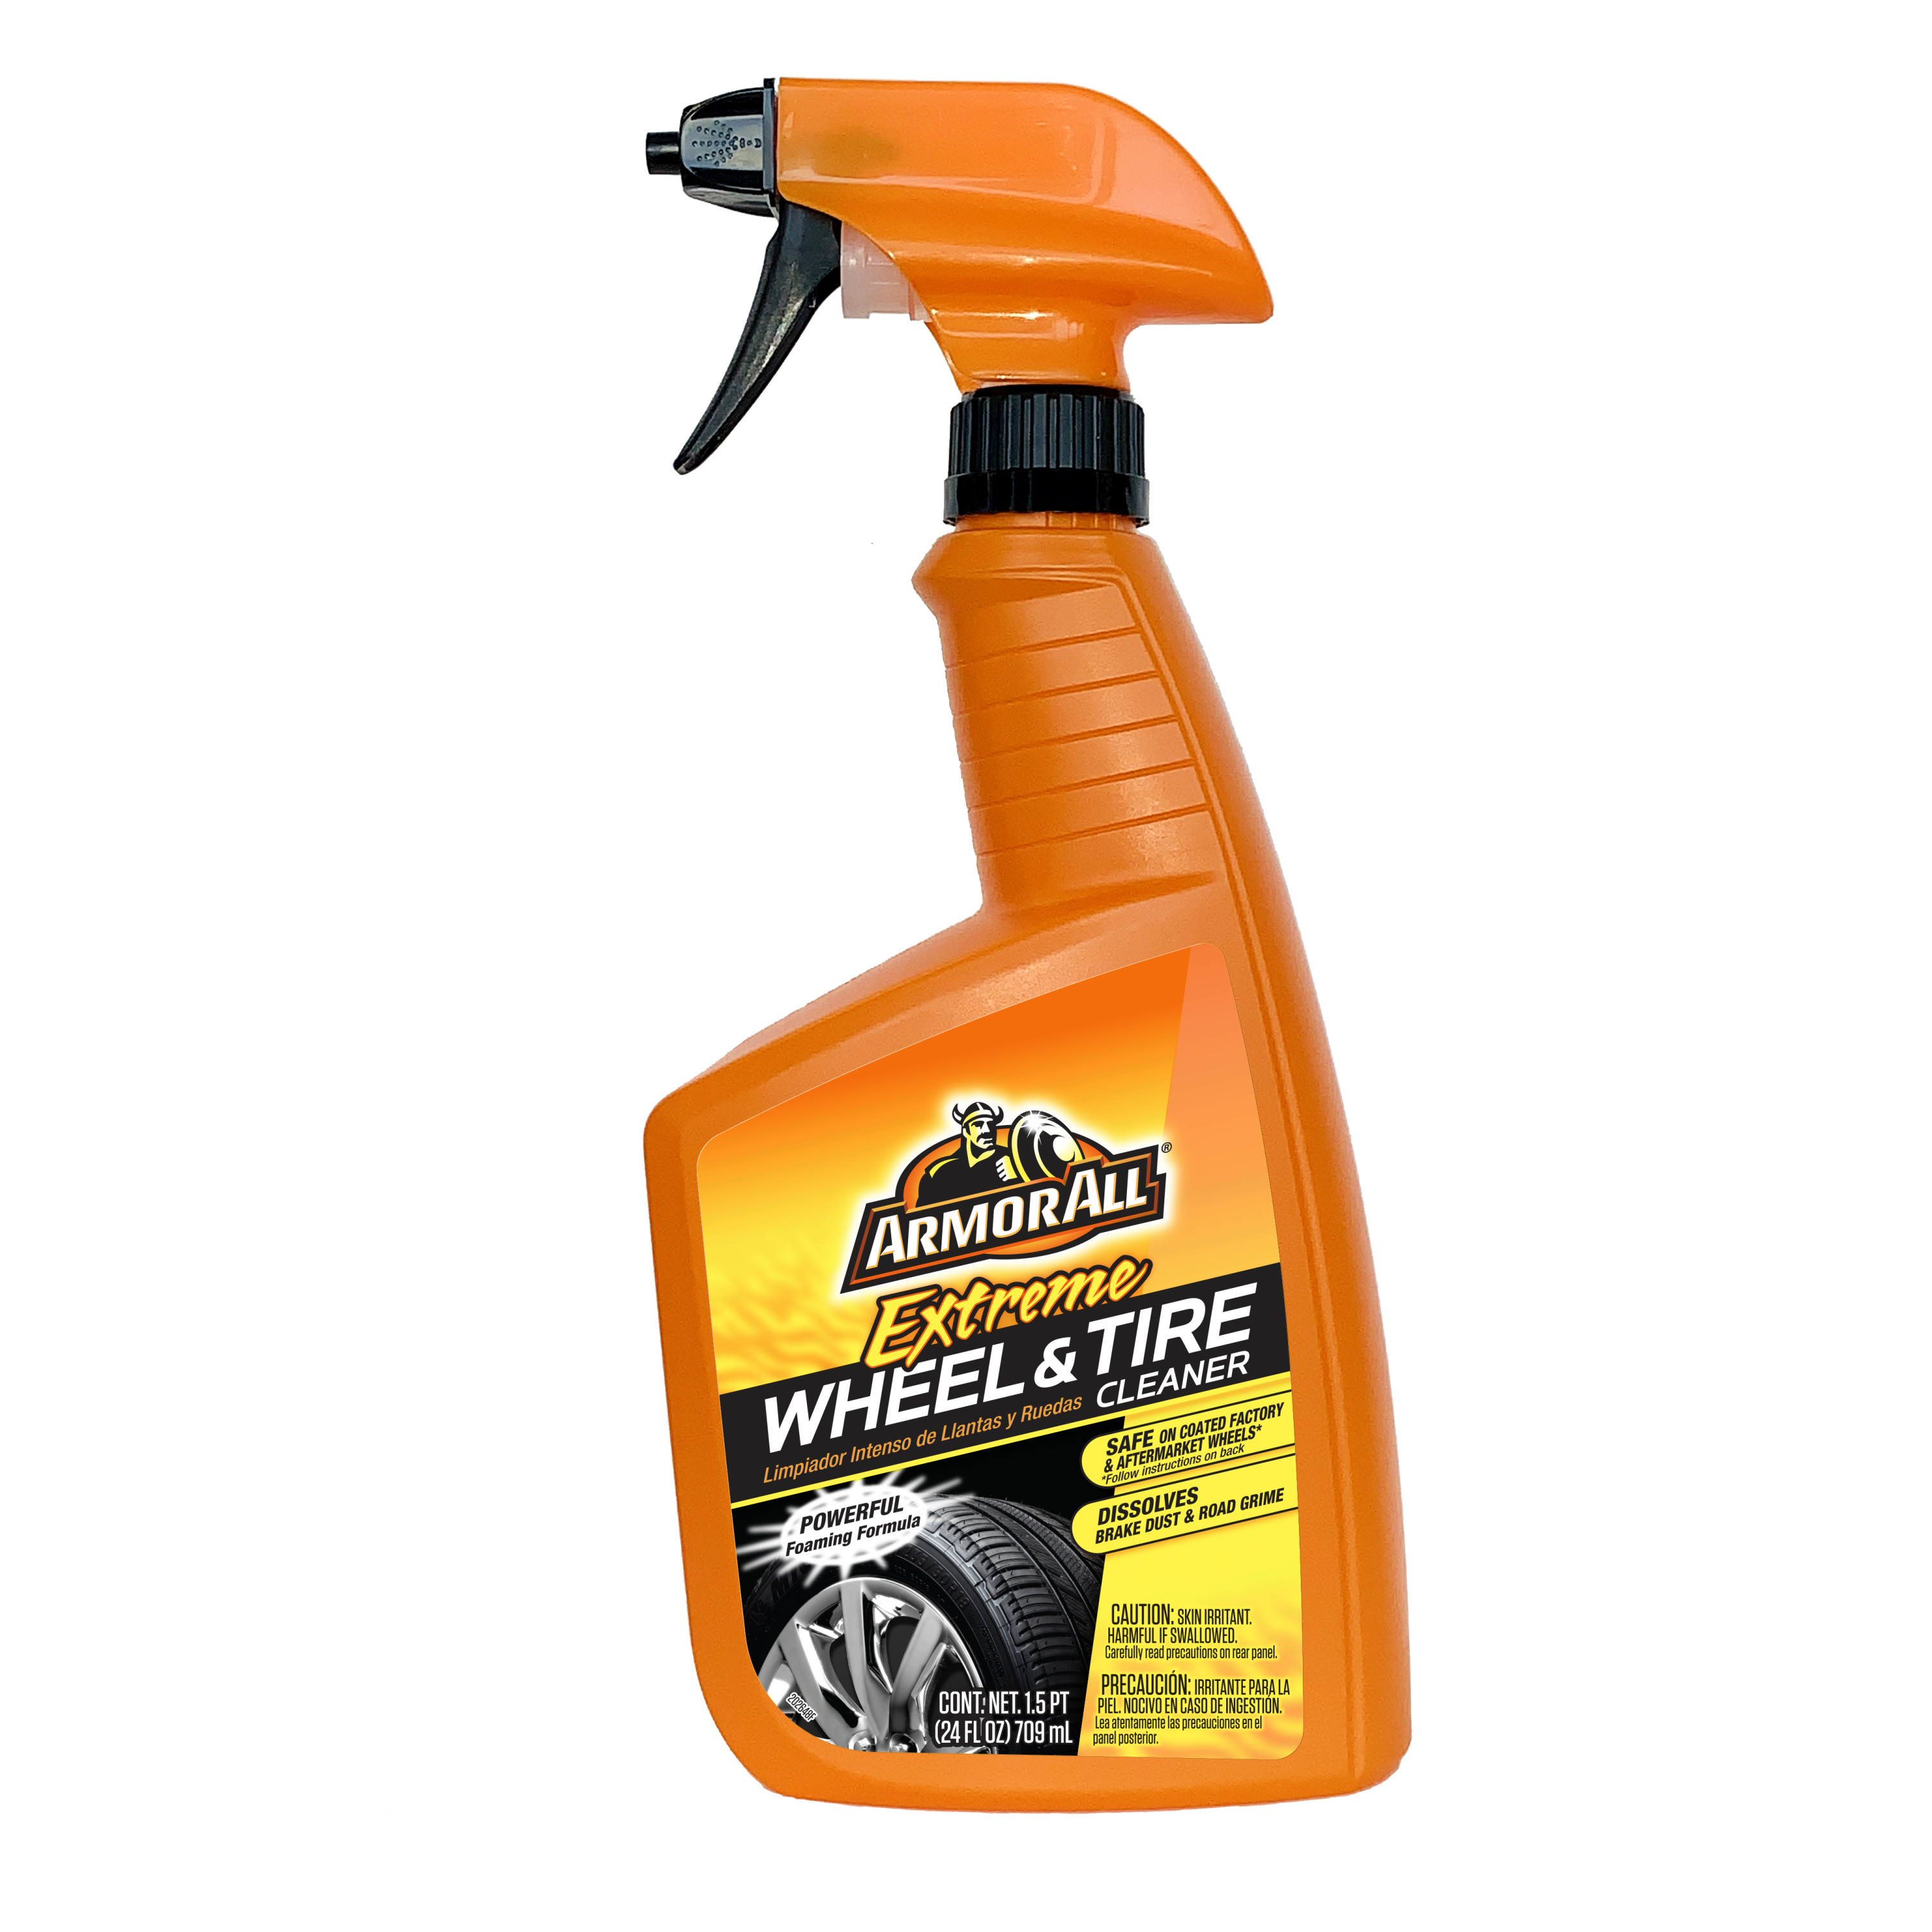 Armor All Extreme Wheel and Tire Cleaner - 24 FL OZ - image 1 of 4